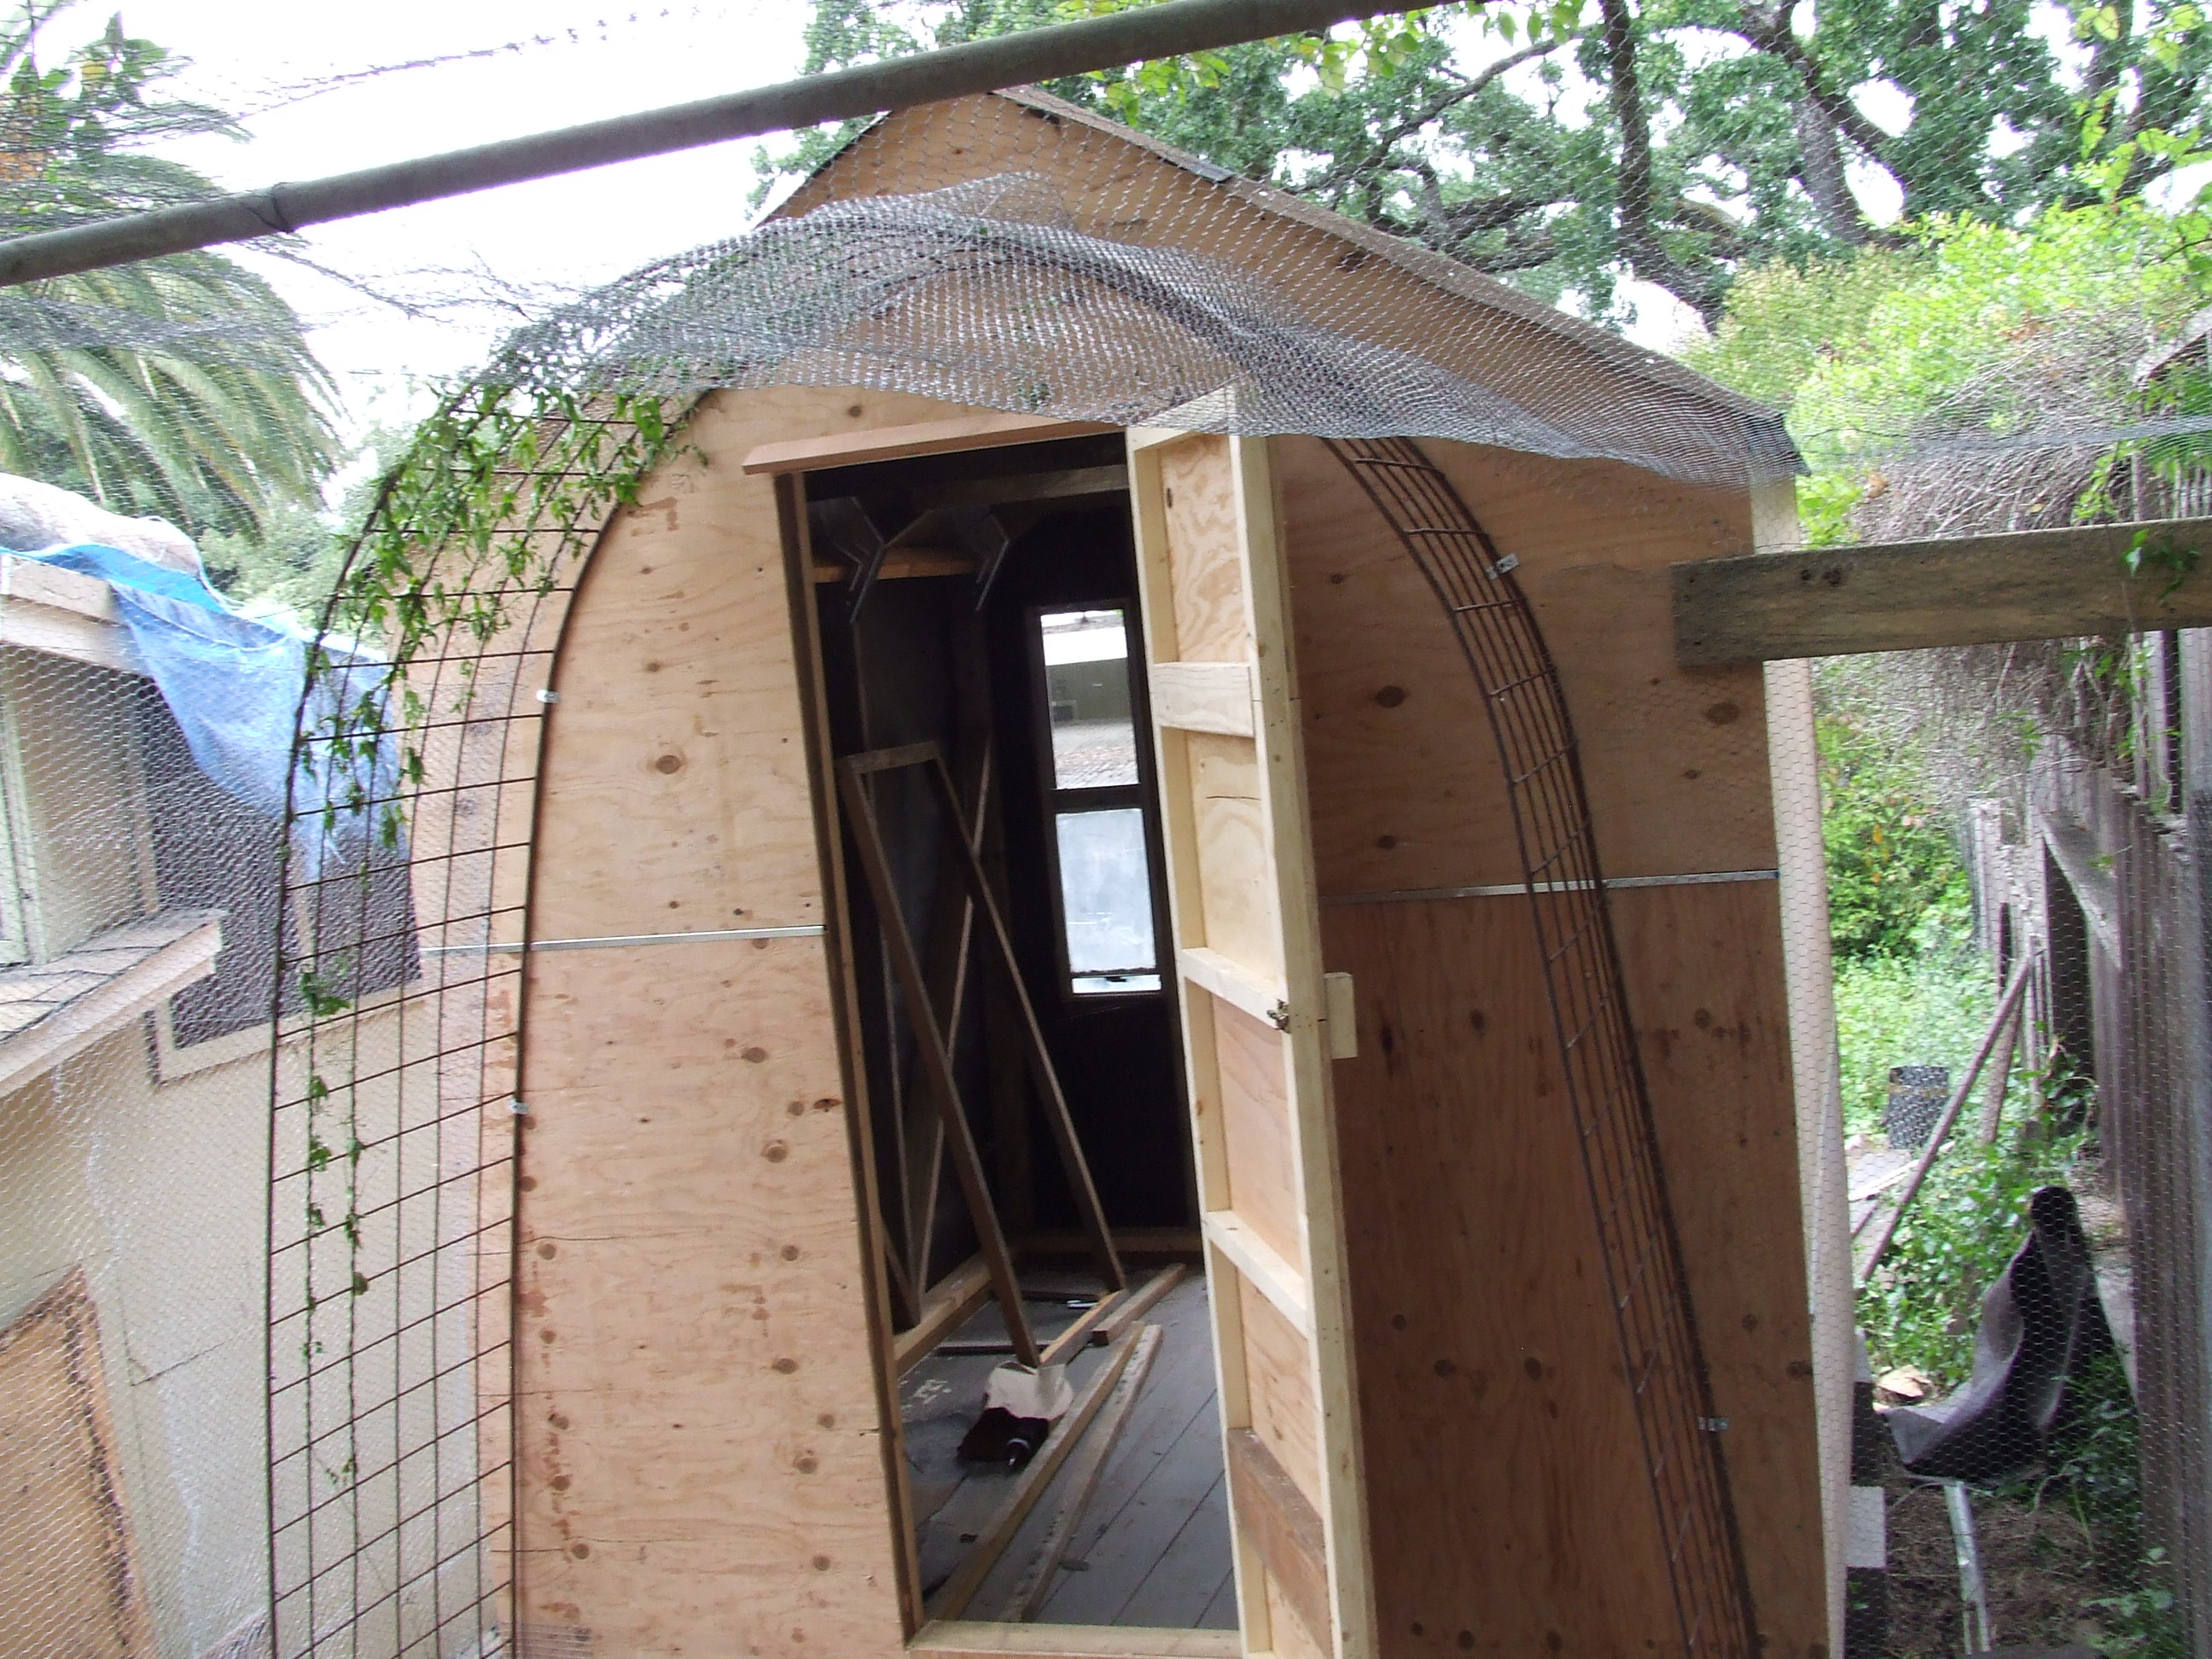 We took an old trellis from another part of the property and moved it over  the rear coop door to prevent the chicken wire from hitting the door when it was opened. You can also see a metal pipe that was placed over the center of the run to help hold up the chicken wire there.